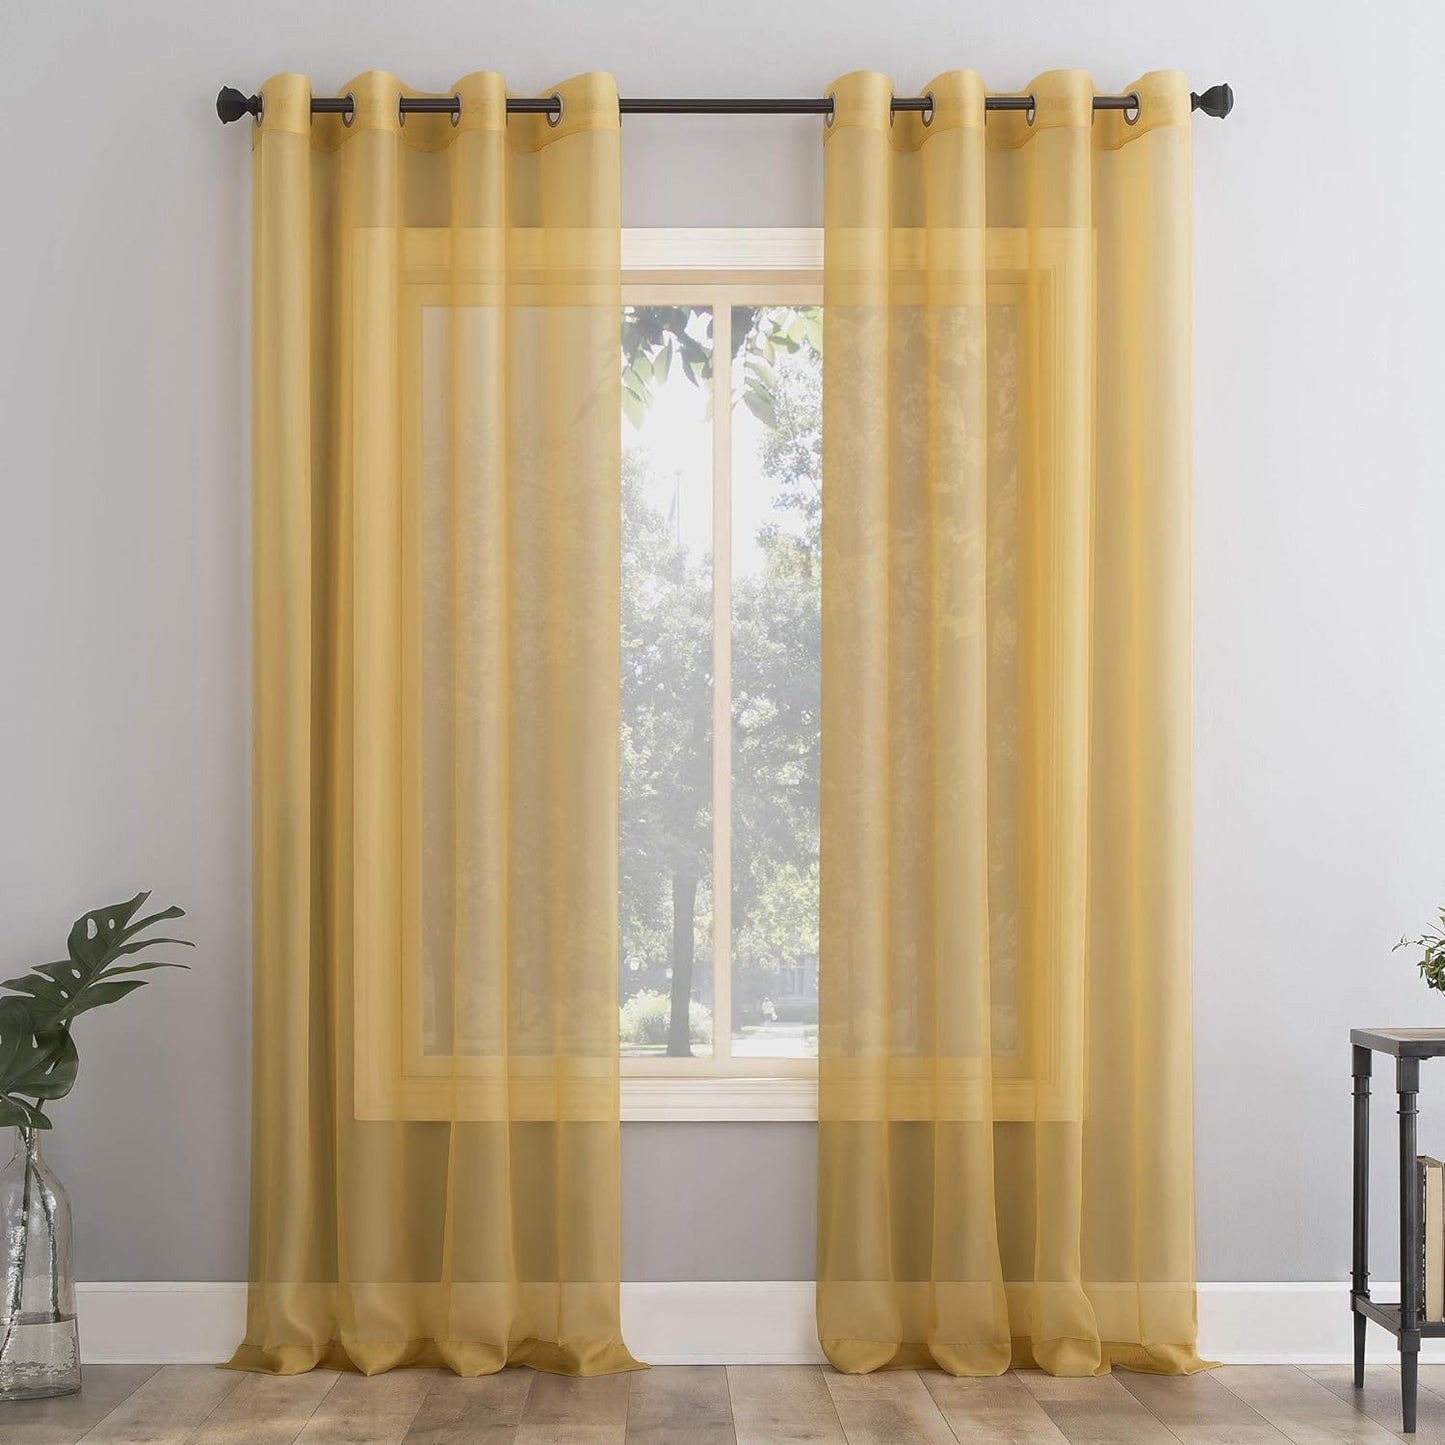 No. 918 Emily Sheer Voile Grommet Curtain Panel, 59" X 95", White  No. 918 Curry Yellow Curtain Panel 59" X 84"